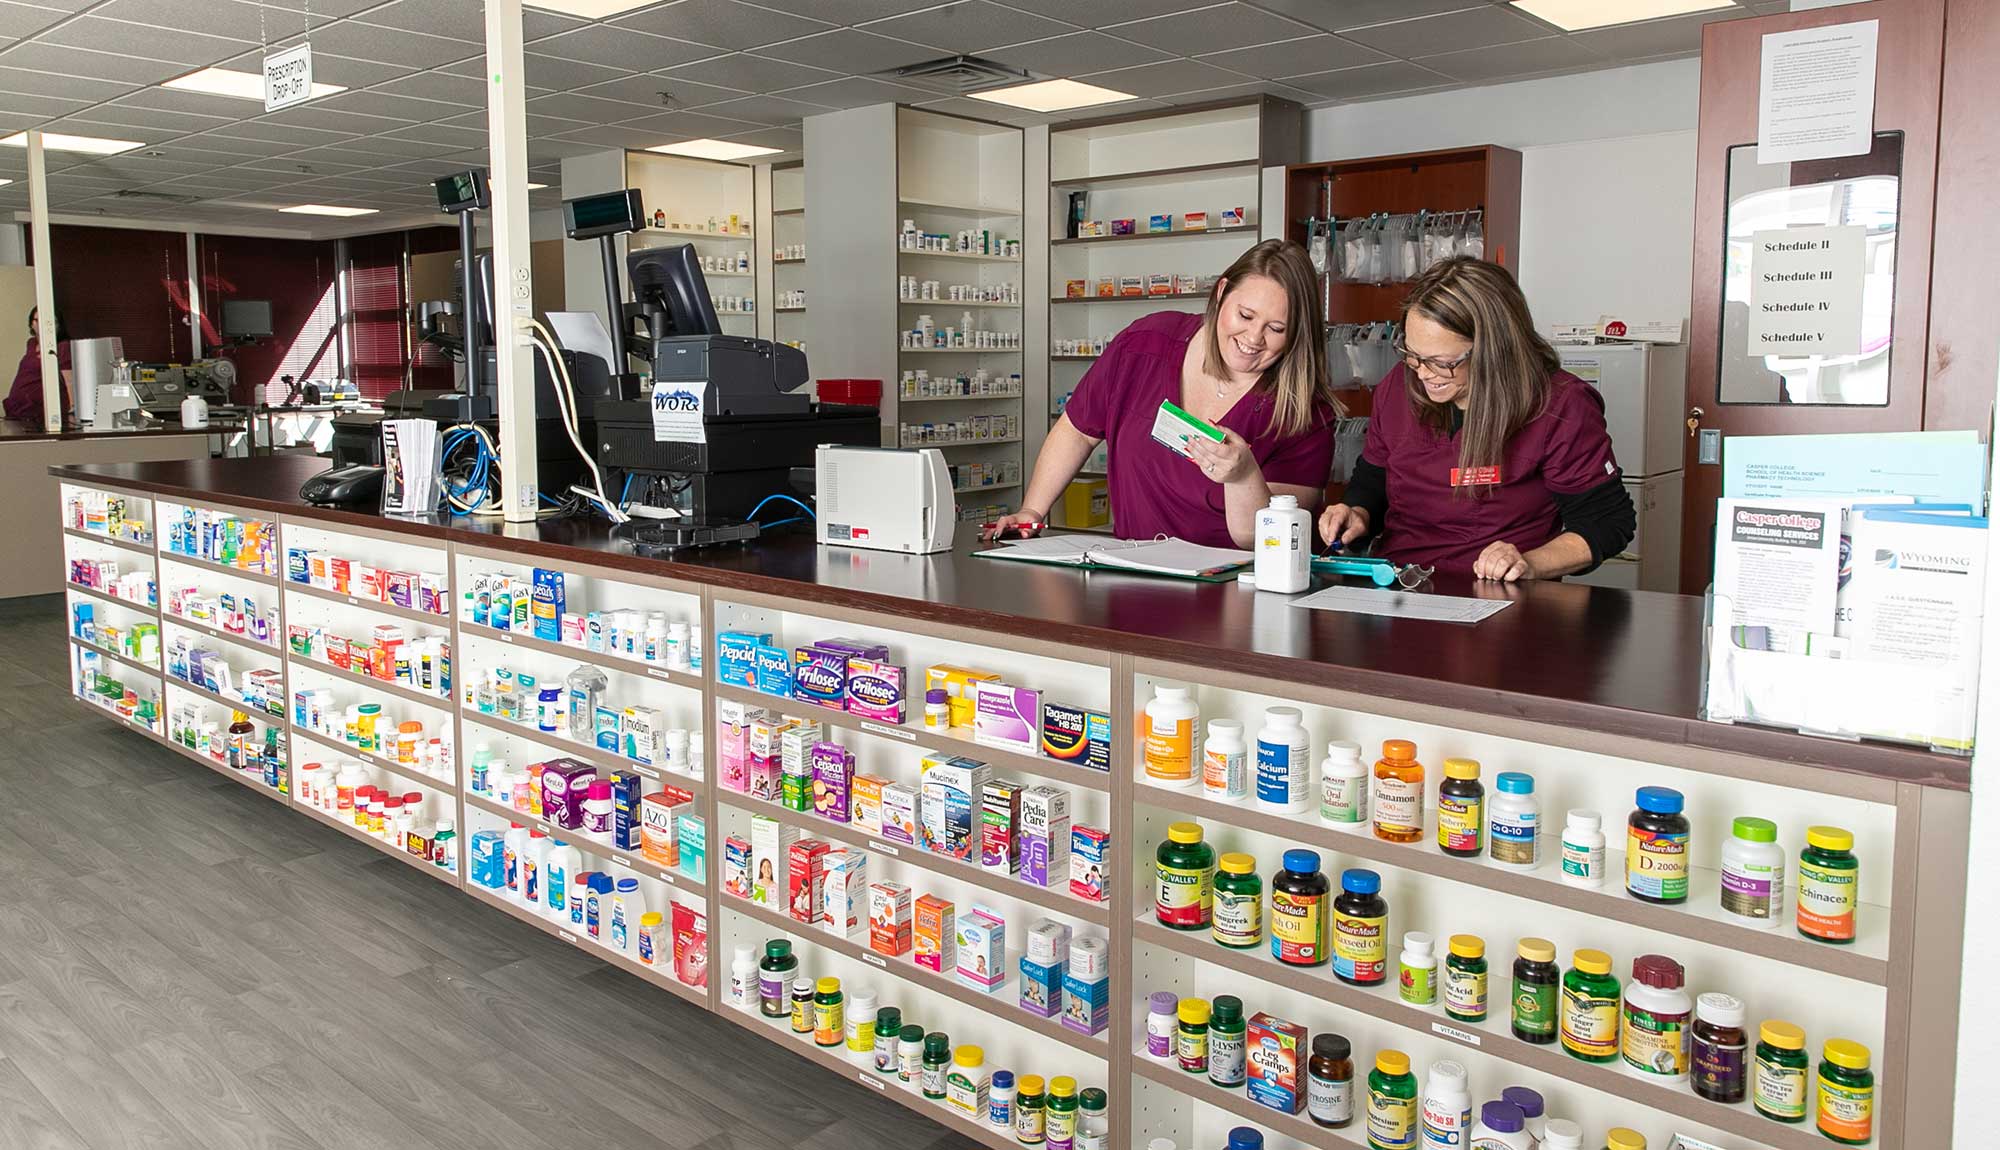 A student holds a pill bottle while walking past shelves set up like a pharmacy.